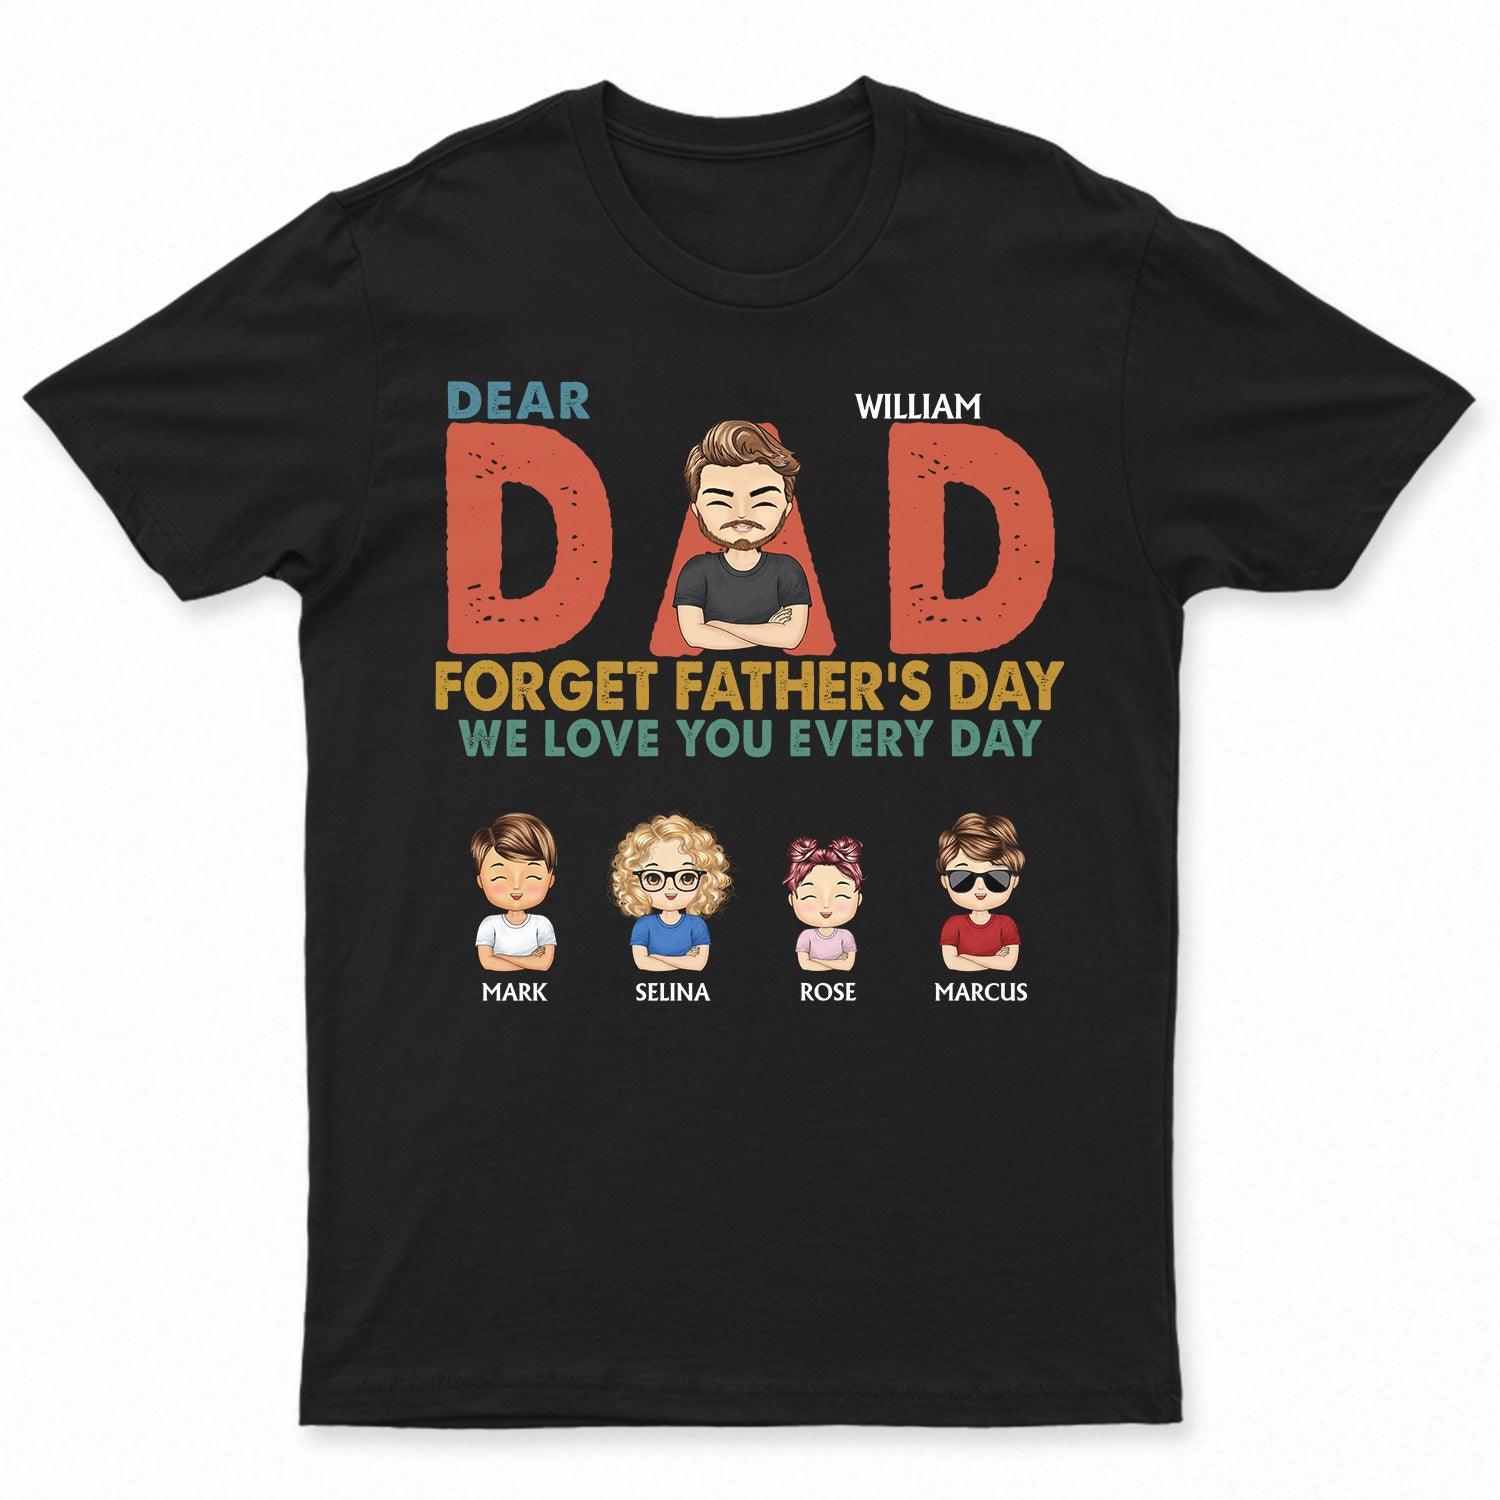 Dad We Love You Every Day - Birthday Gift For Father, Grandpa, Family - Personalized Custom T Shirt